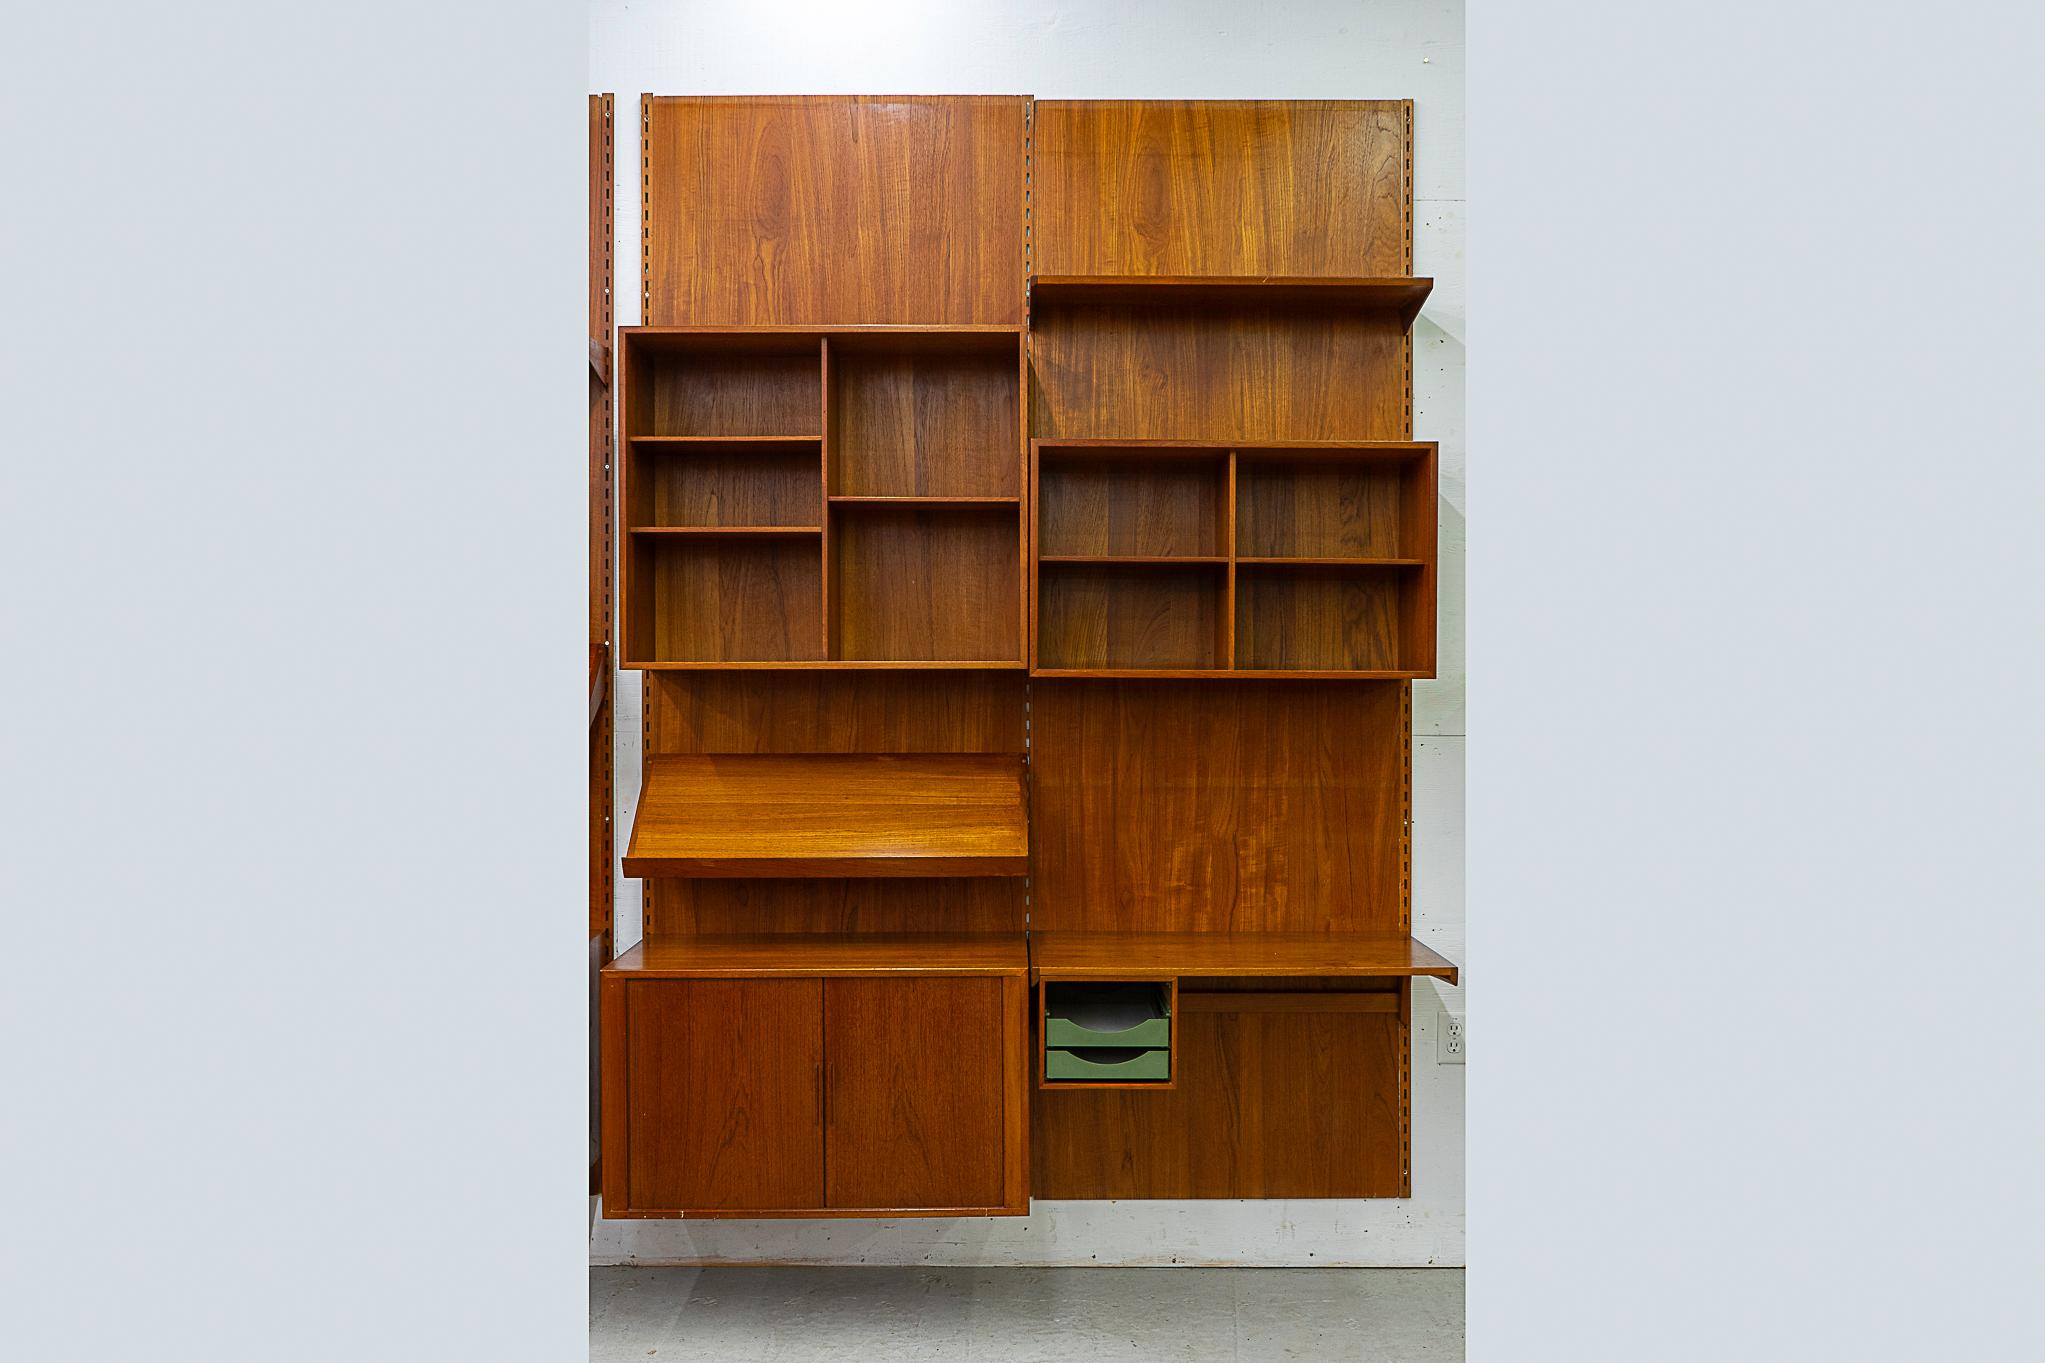 Teak Danish wall system by Kai Kristiansen, circa 1960's. Fantastic double bank wall system with stunning book-matched veneer and dovetail construction. Modular components mount with 3 rails, back panel use is optional. Includes: tambour door